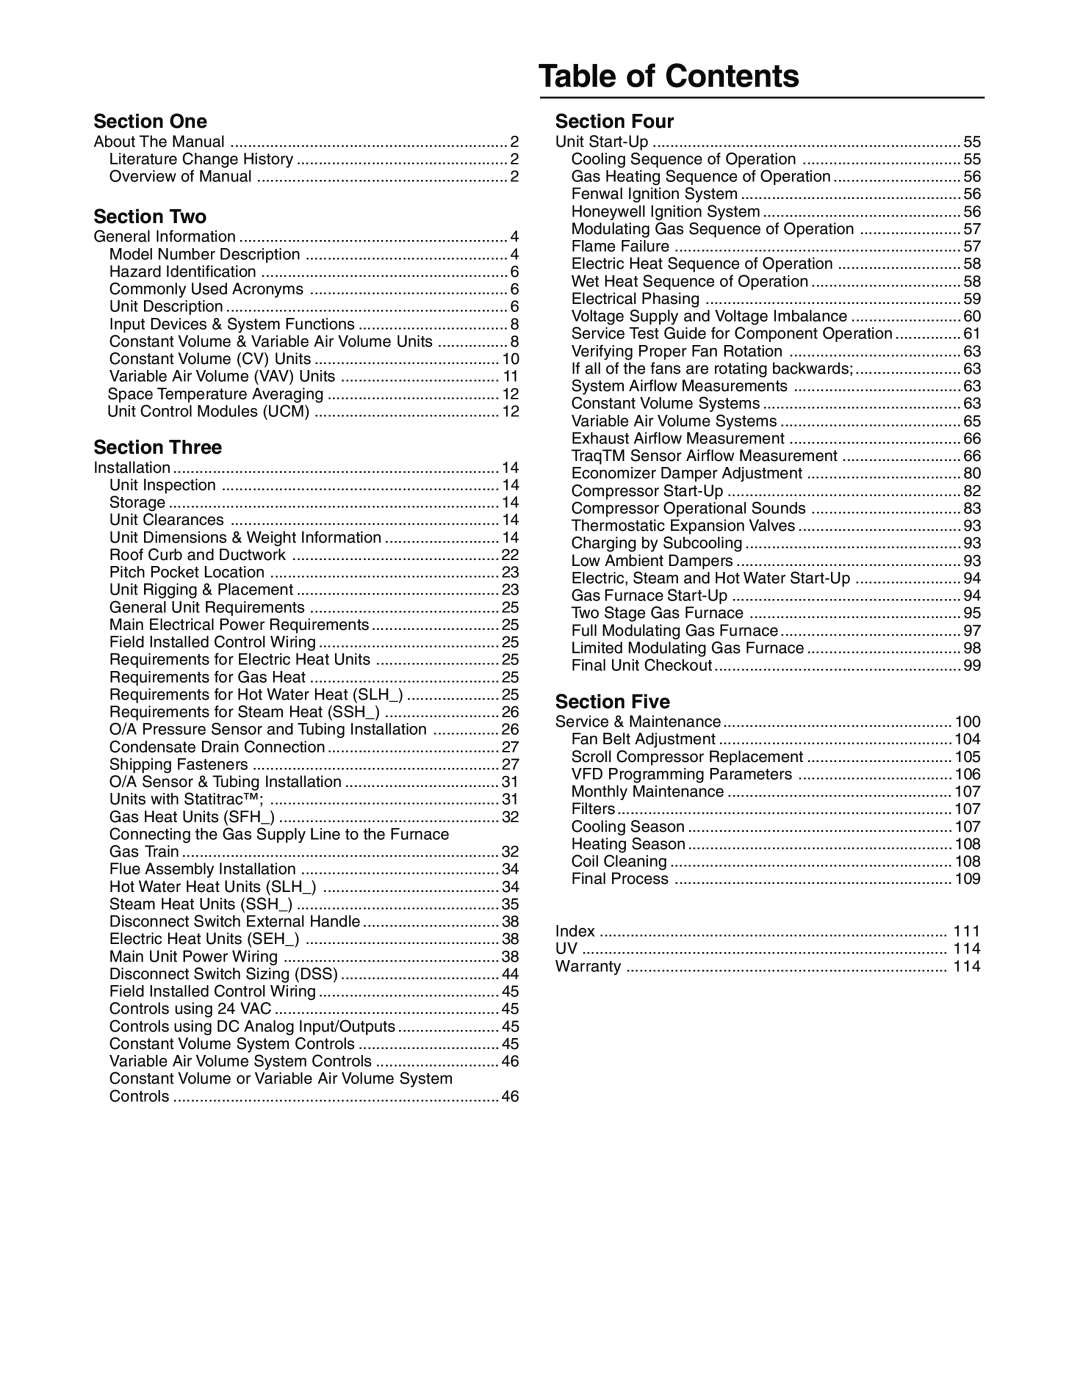 Trane RT-SVX10C-EN specifications Table of Contents, Section One, Section Two, Section Three, Section Four, Section Five 